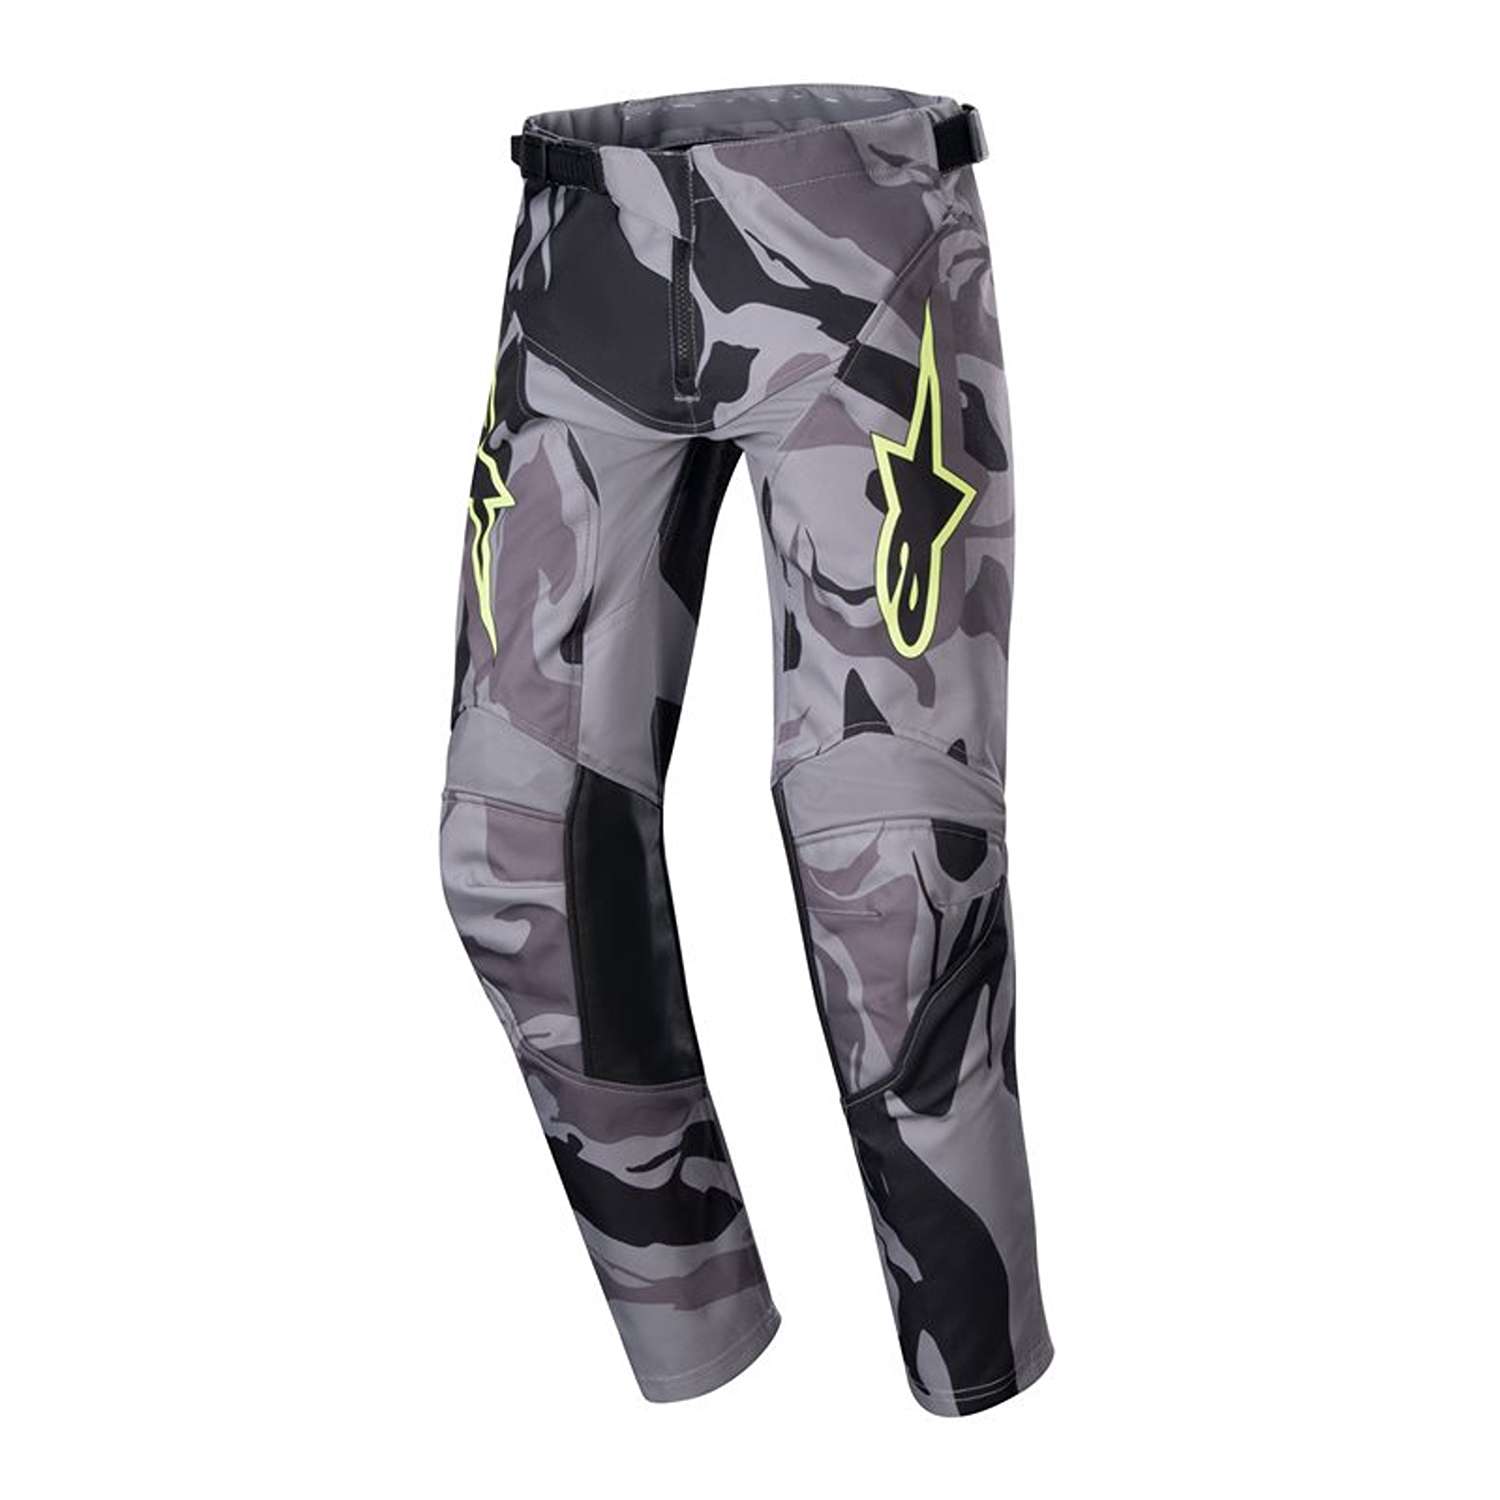 Image of Alpinestars Youth Racer Tactical Pants Cast Gray Camo Magnet Size 22 ID 8059347267388